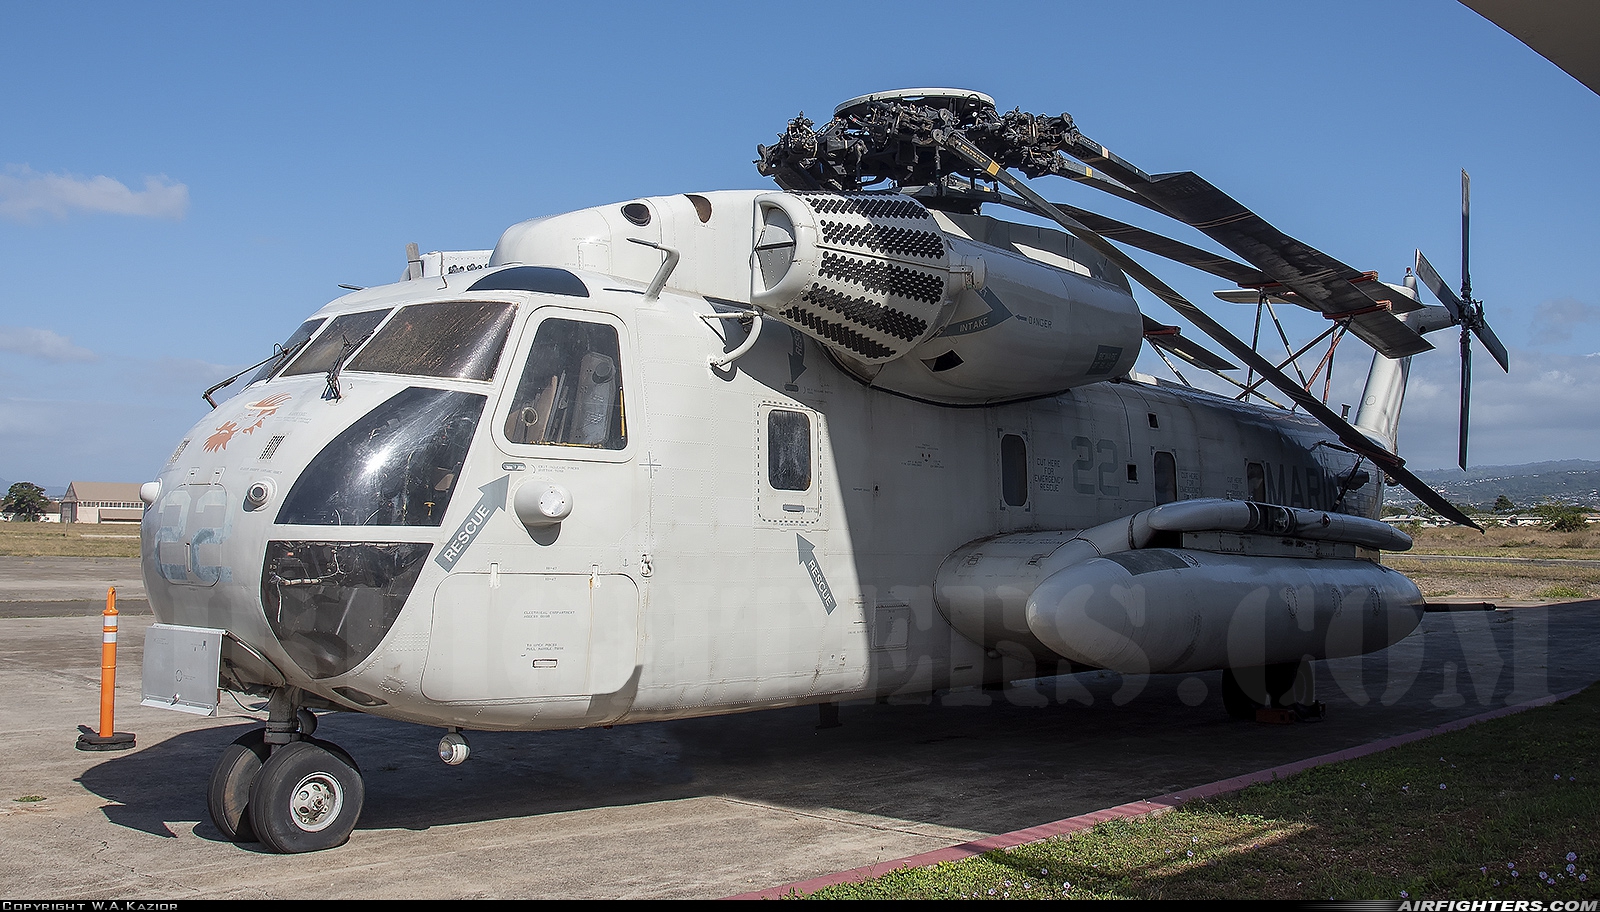 USA - Marines Sikorsky CH-53D Super Stallion 157173 at Ford Island - NALF Naval Auxiliary Landing Field (NPS), USA